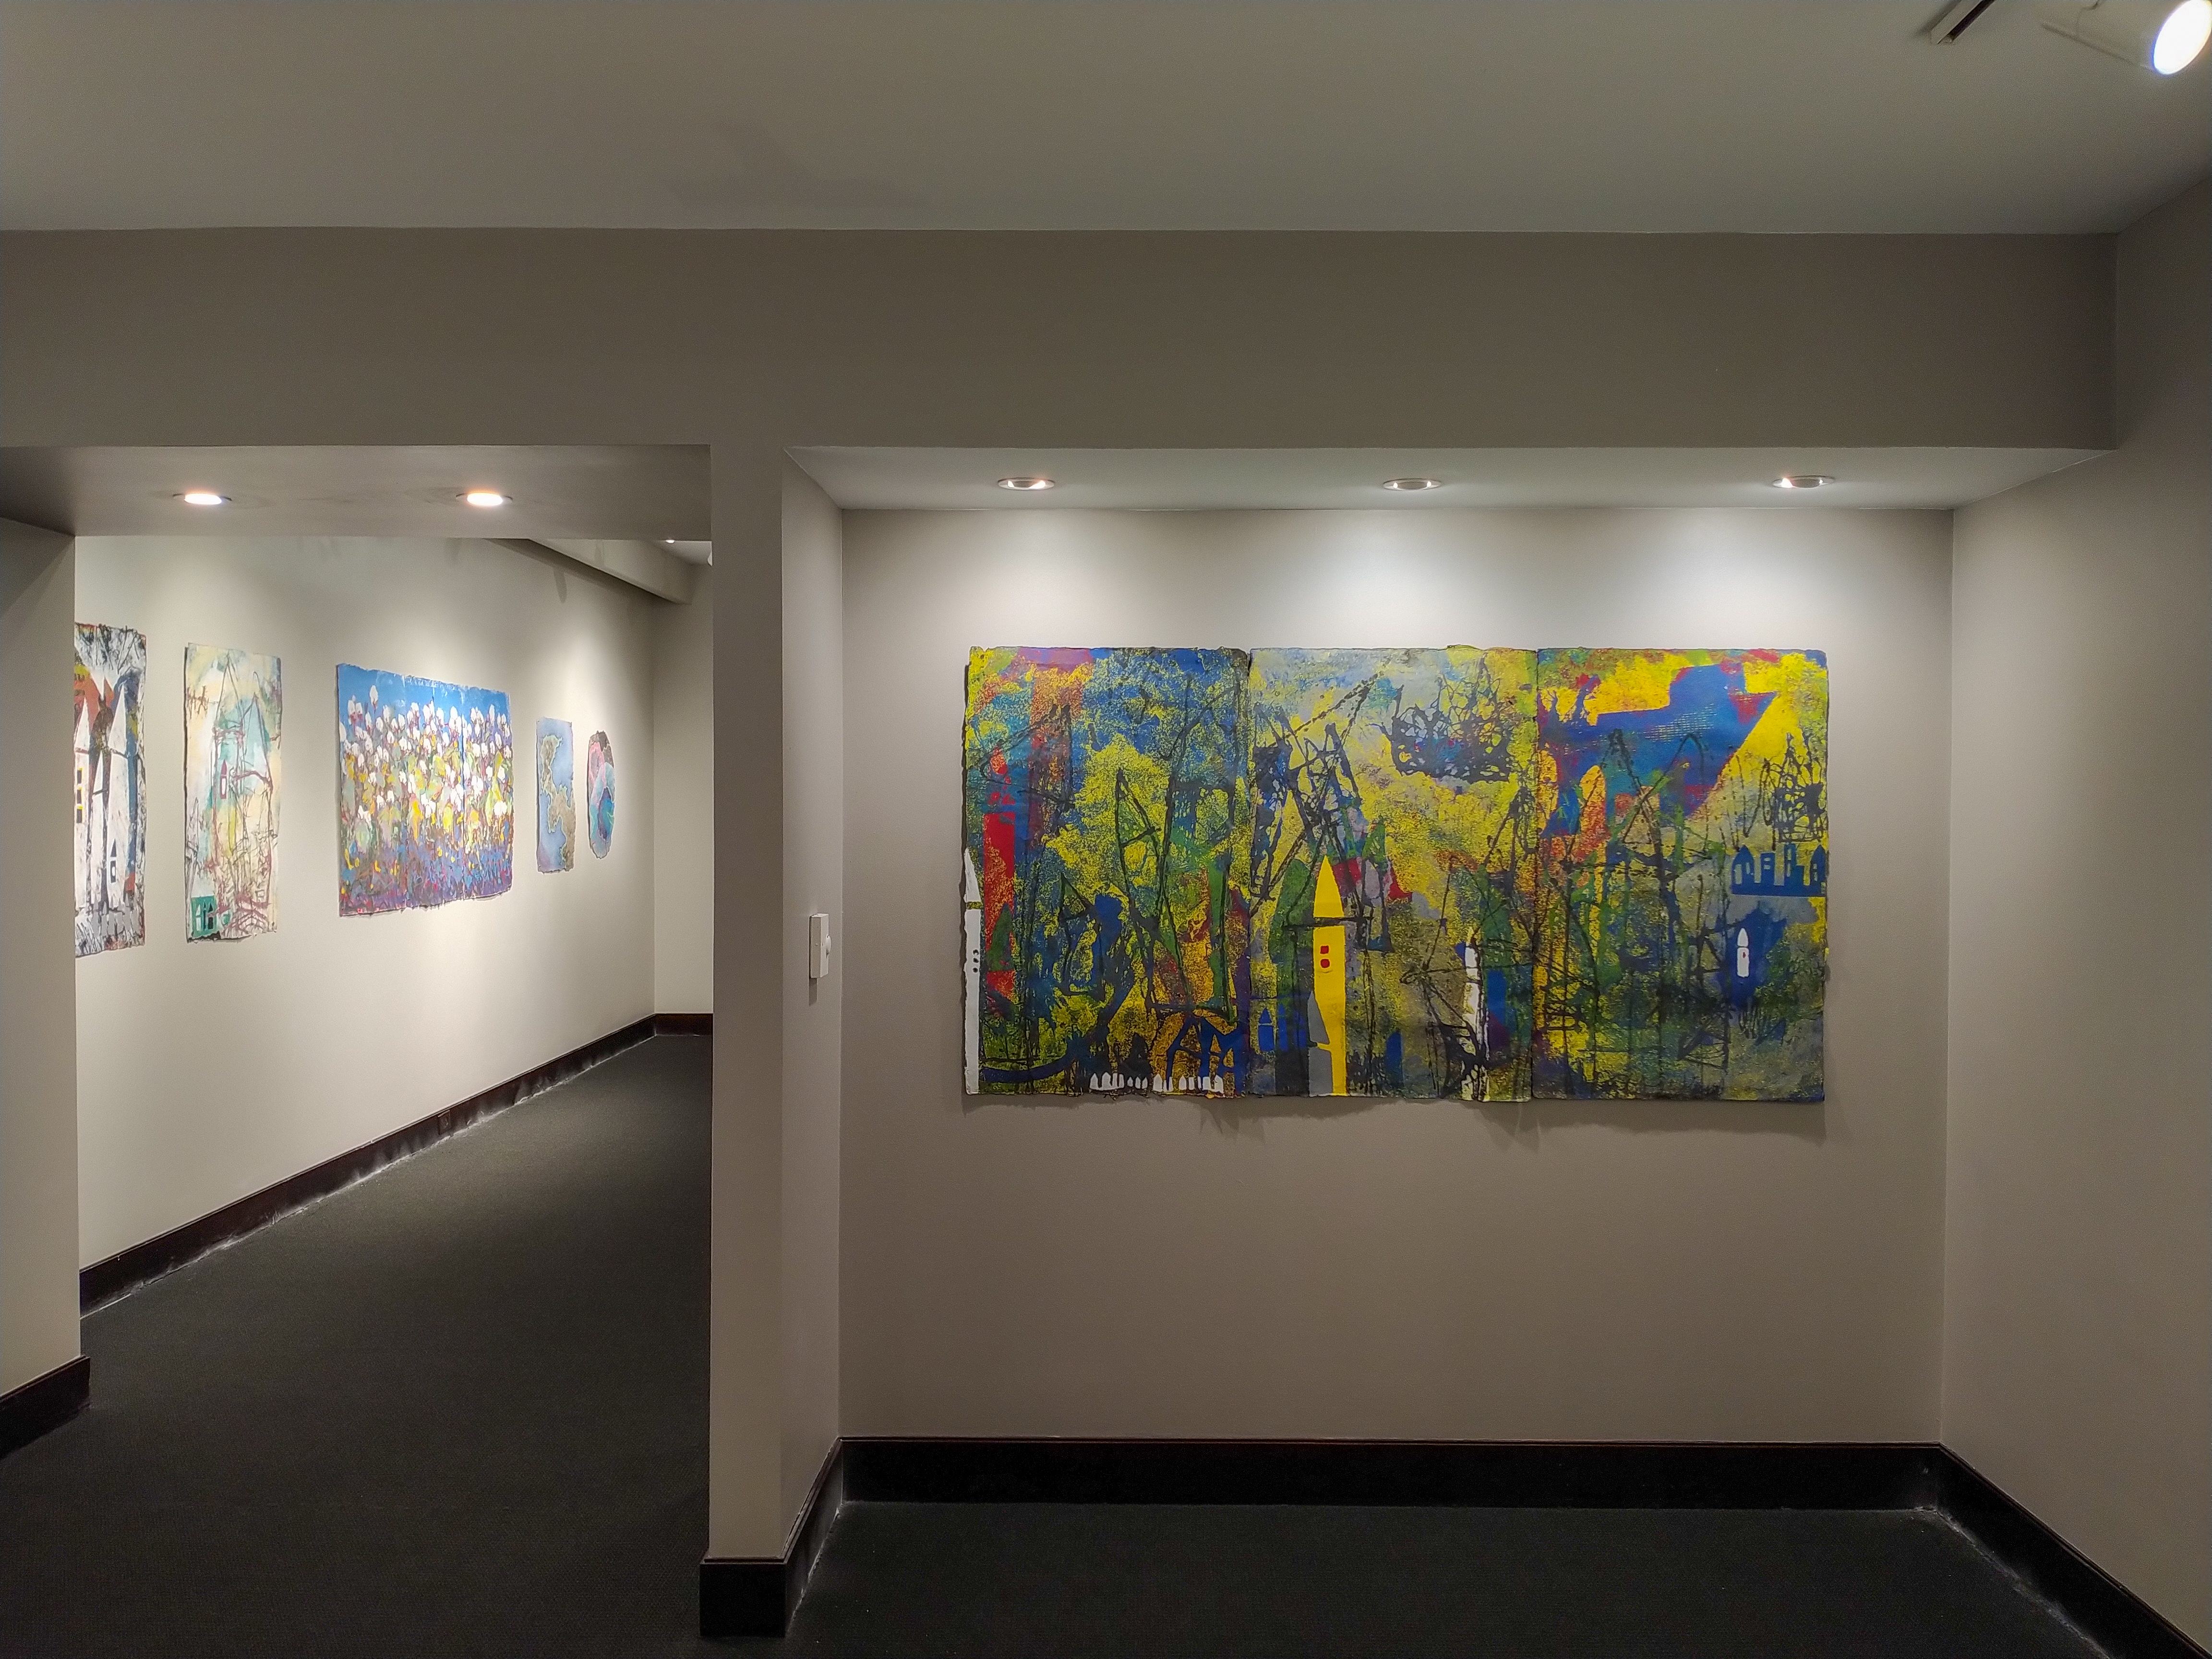 The small gallery has an alcove. Romping Around, a triptych by Lea Basile-Lazarus, occupies the alcove. This piece revisits the house icon. This time the houses are rendered in yellow, white, and blue against a very textured background.